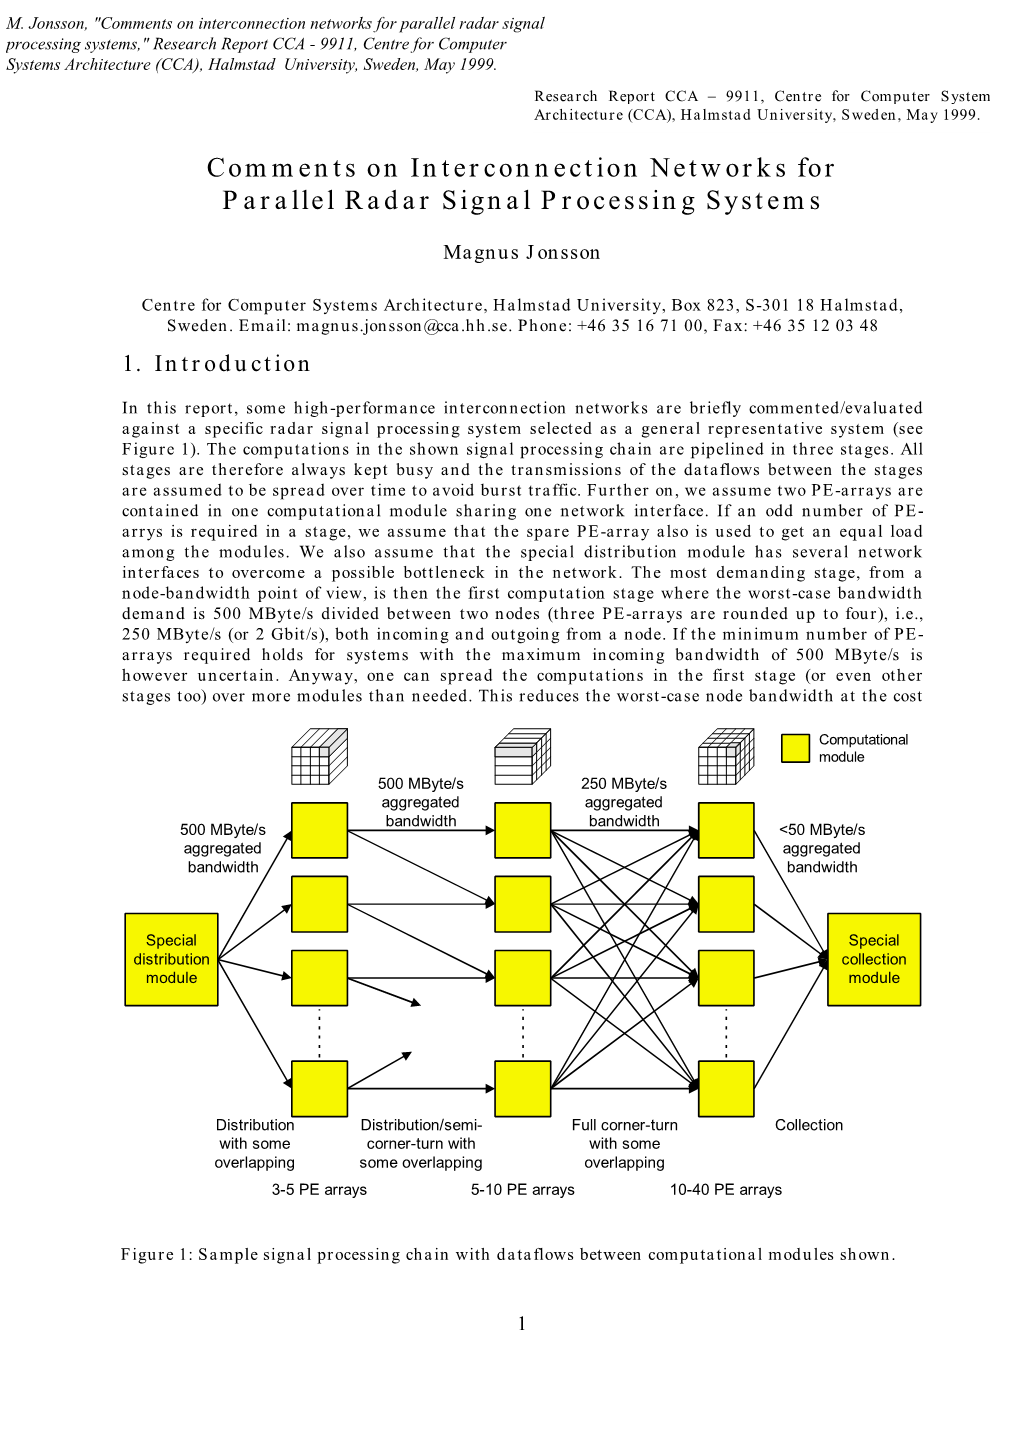 Comments on Interconnection Networks for Parallel Radar Signal Processing Systems